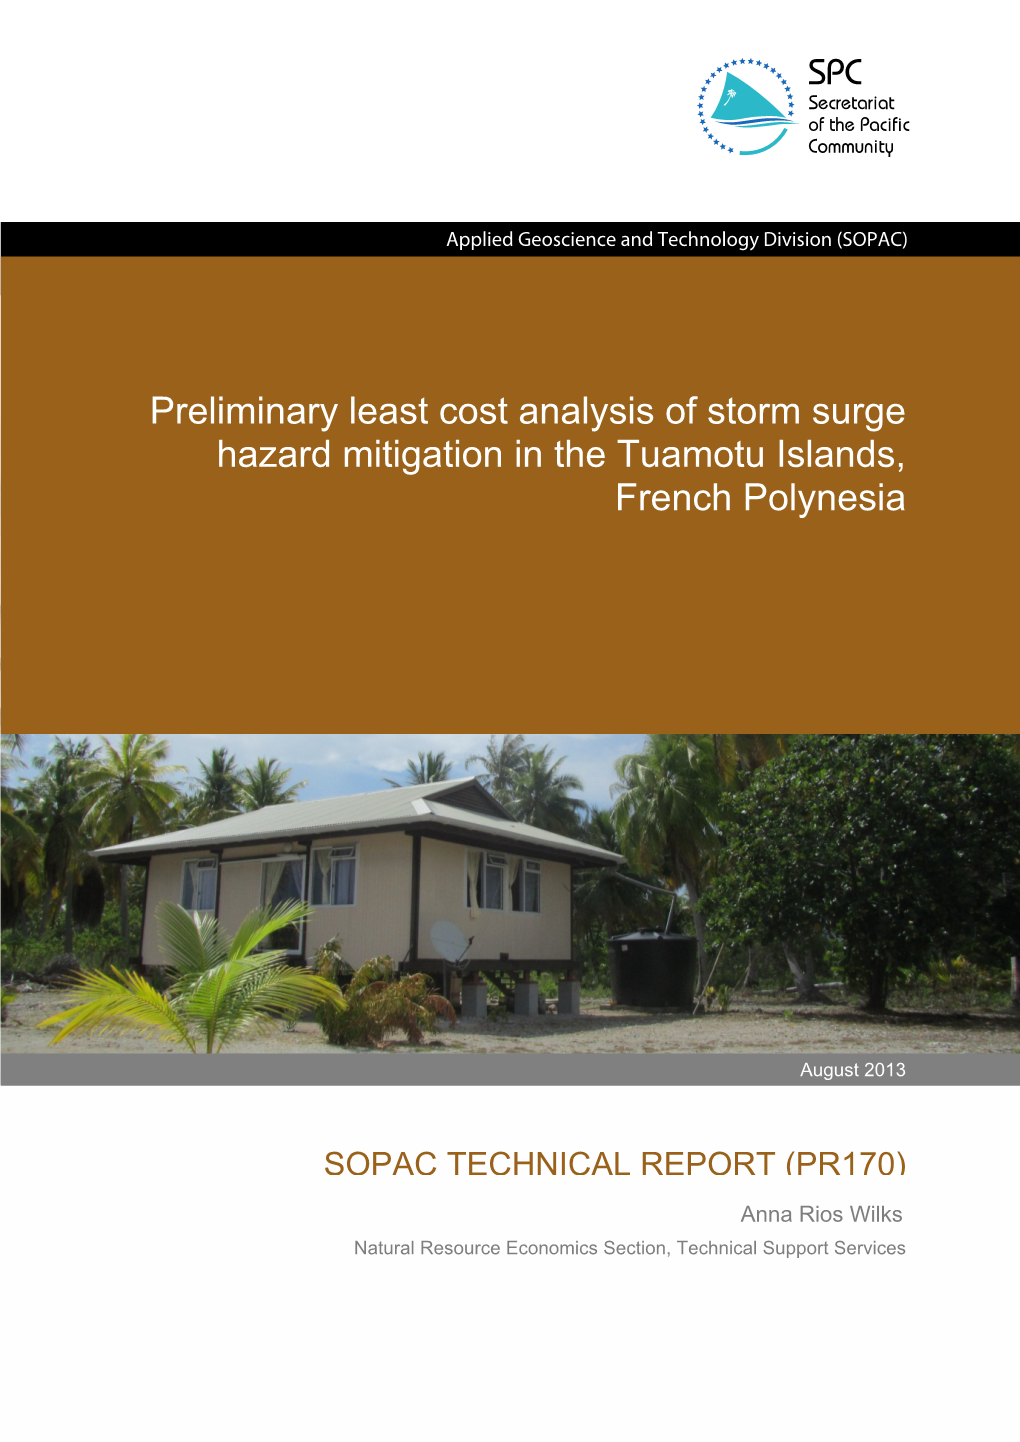 Preliminary Least Cost Analysis of Storm Surge Hazard Mitigation in the Tuamotu Islands, French Polynesia 